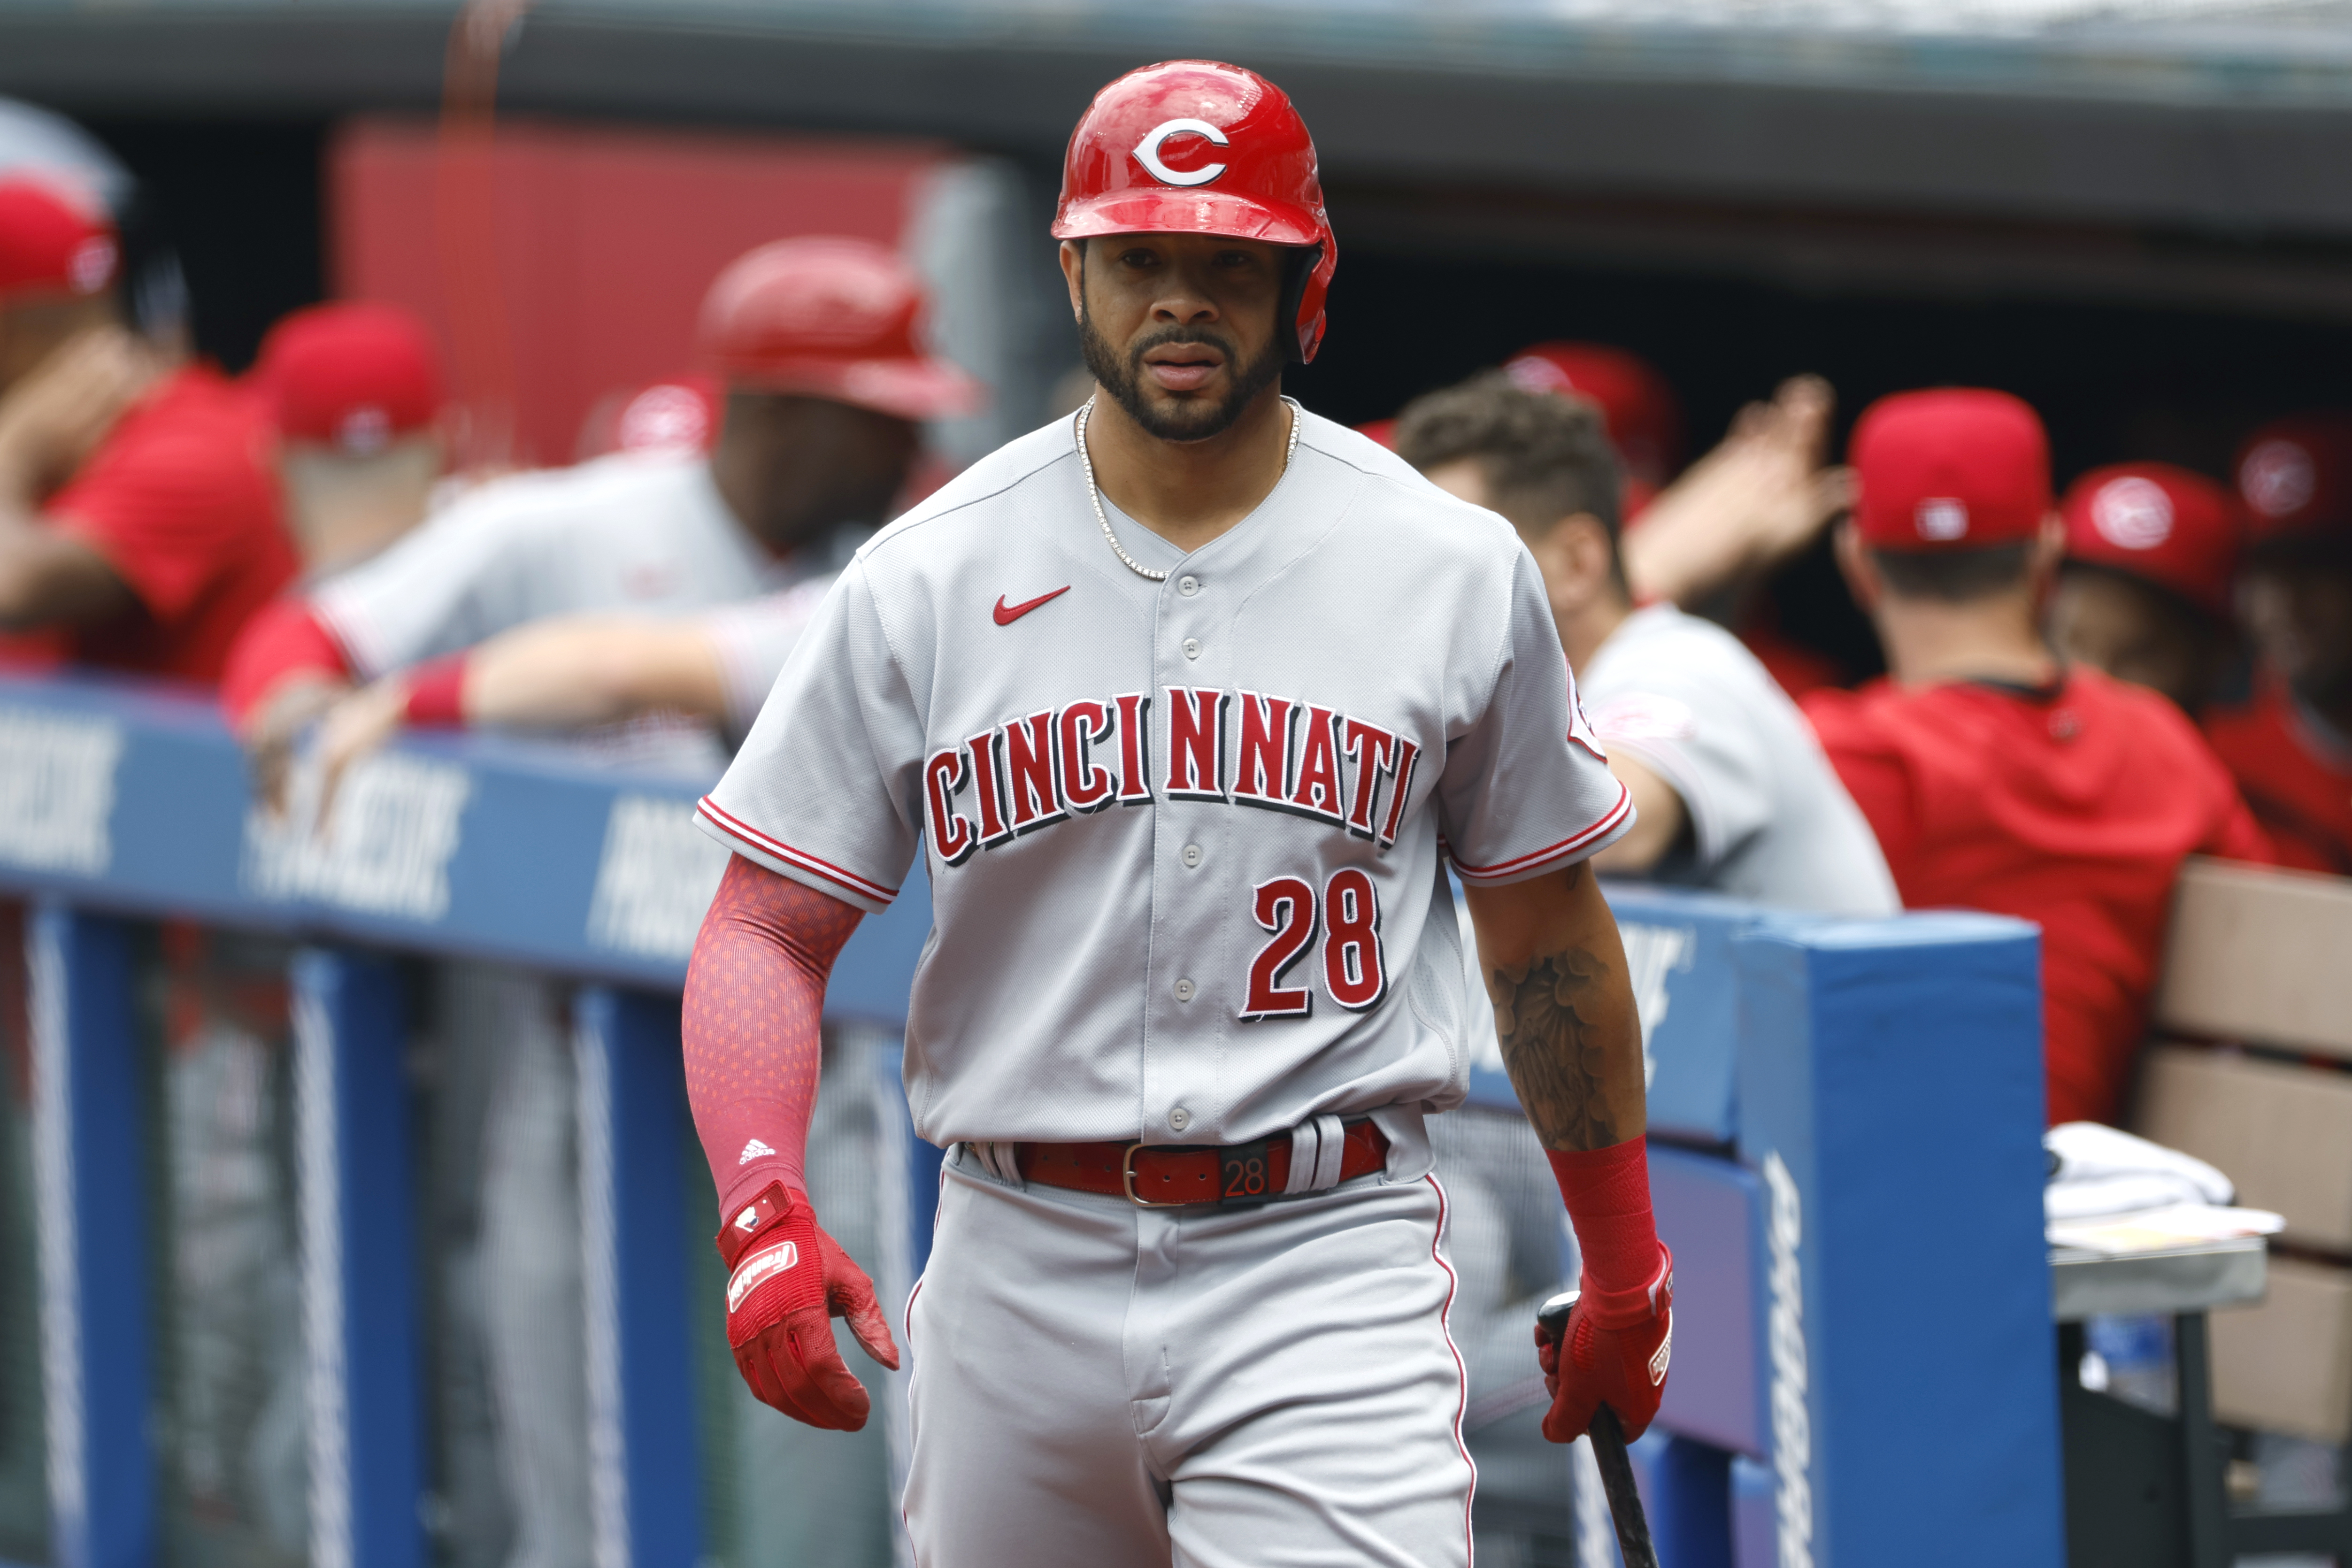 Tommy Pham is playing with a broken hand - DRaysBay